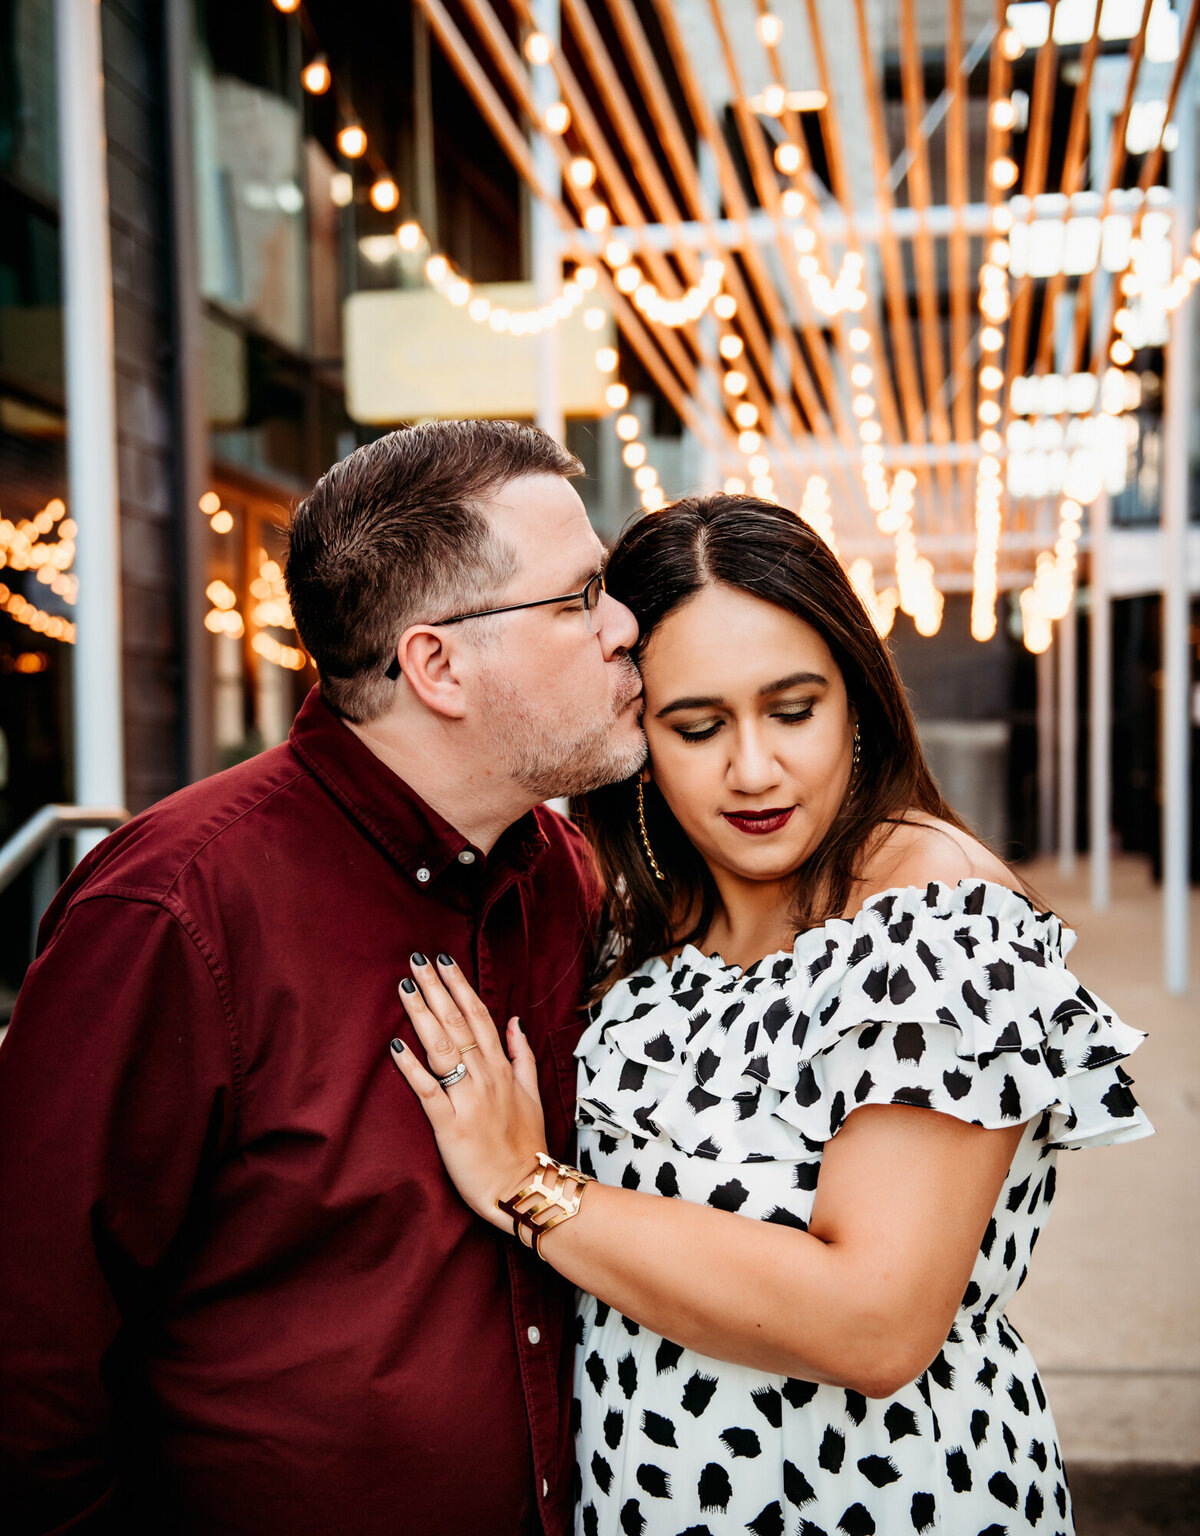 Couples Photography, Man in a maroon shirt kisses woman in black and white dress in front of the lights by Perla's